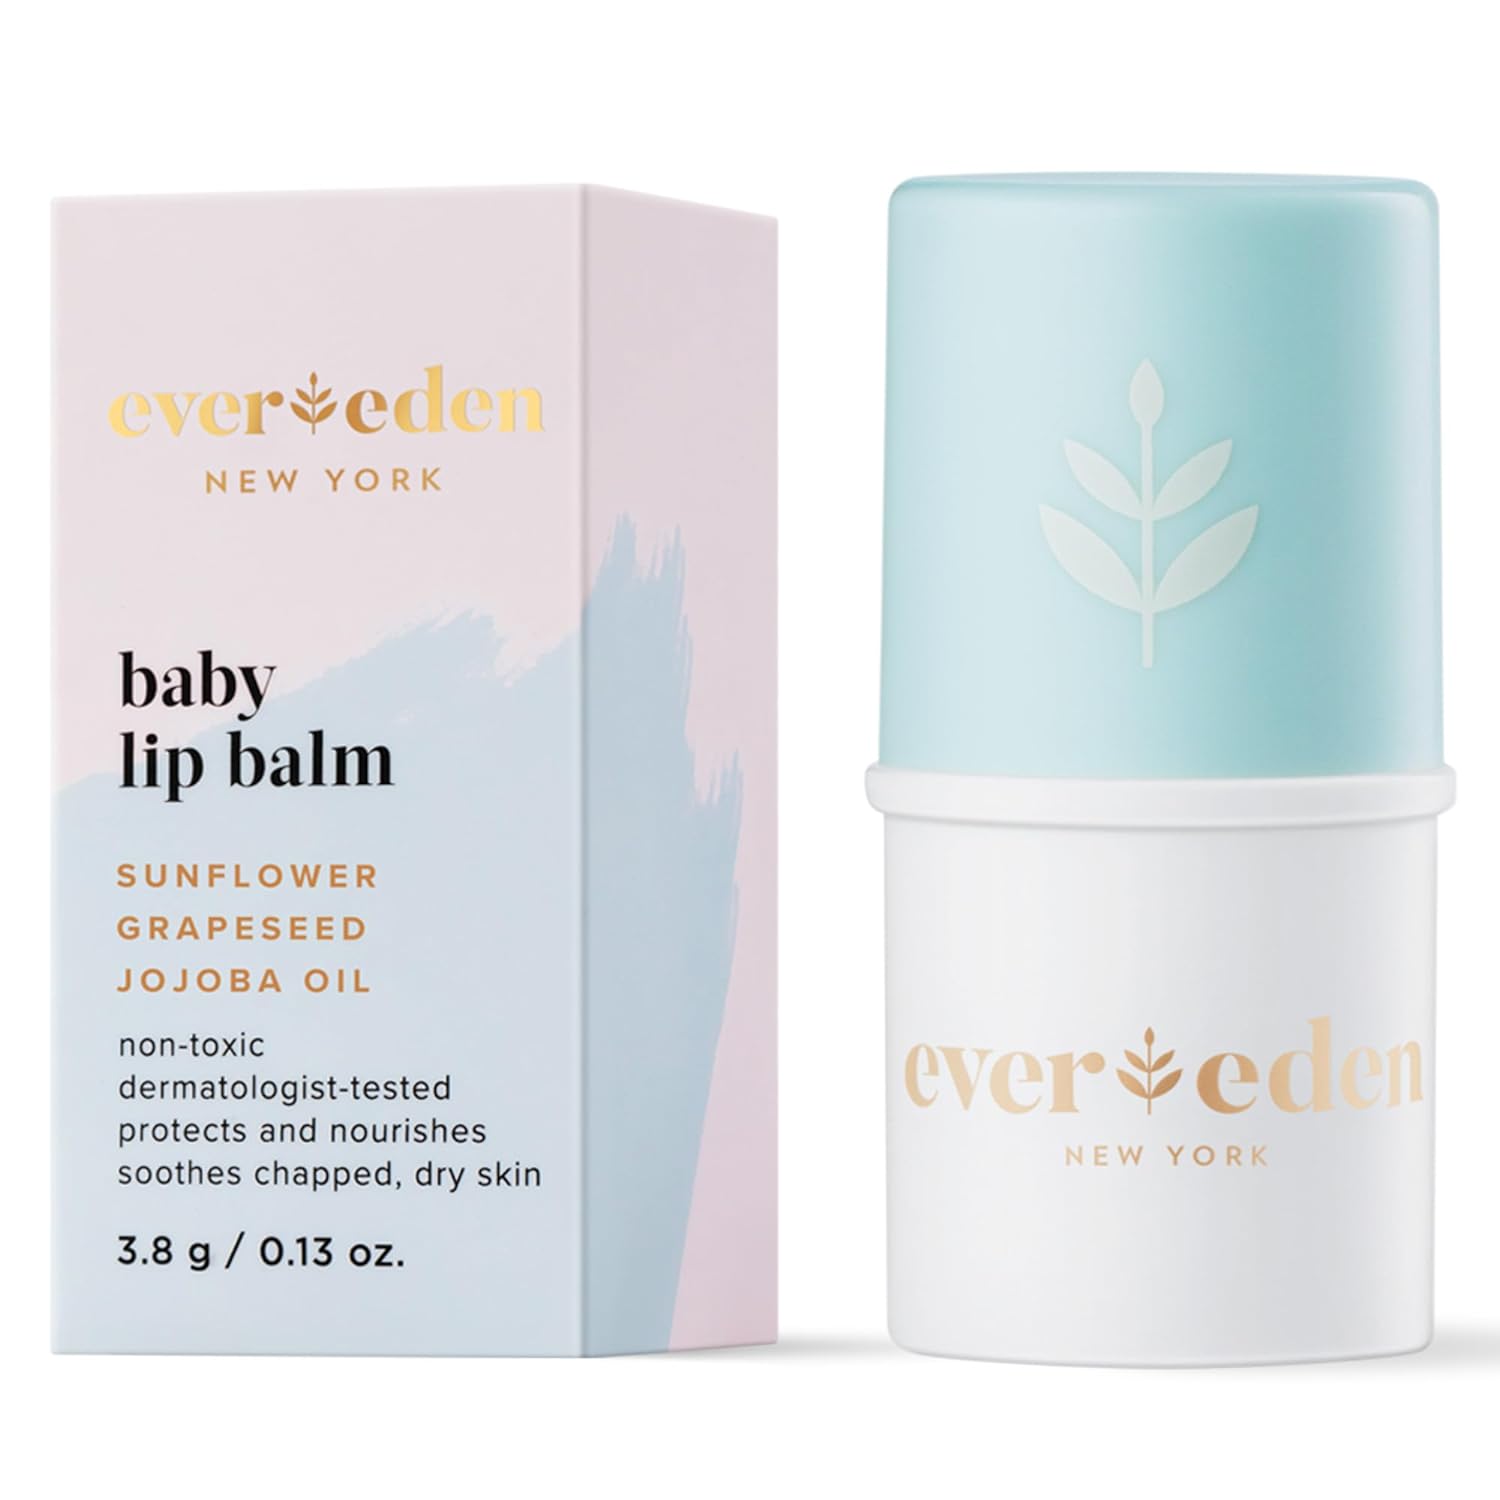 Evereden Baby Lip Balm, 0.13 oz | Clean and Natural Baby Care | Non-toxic and Fragrance Free Baby Skincare